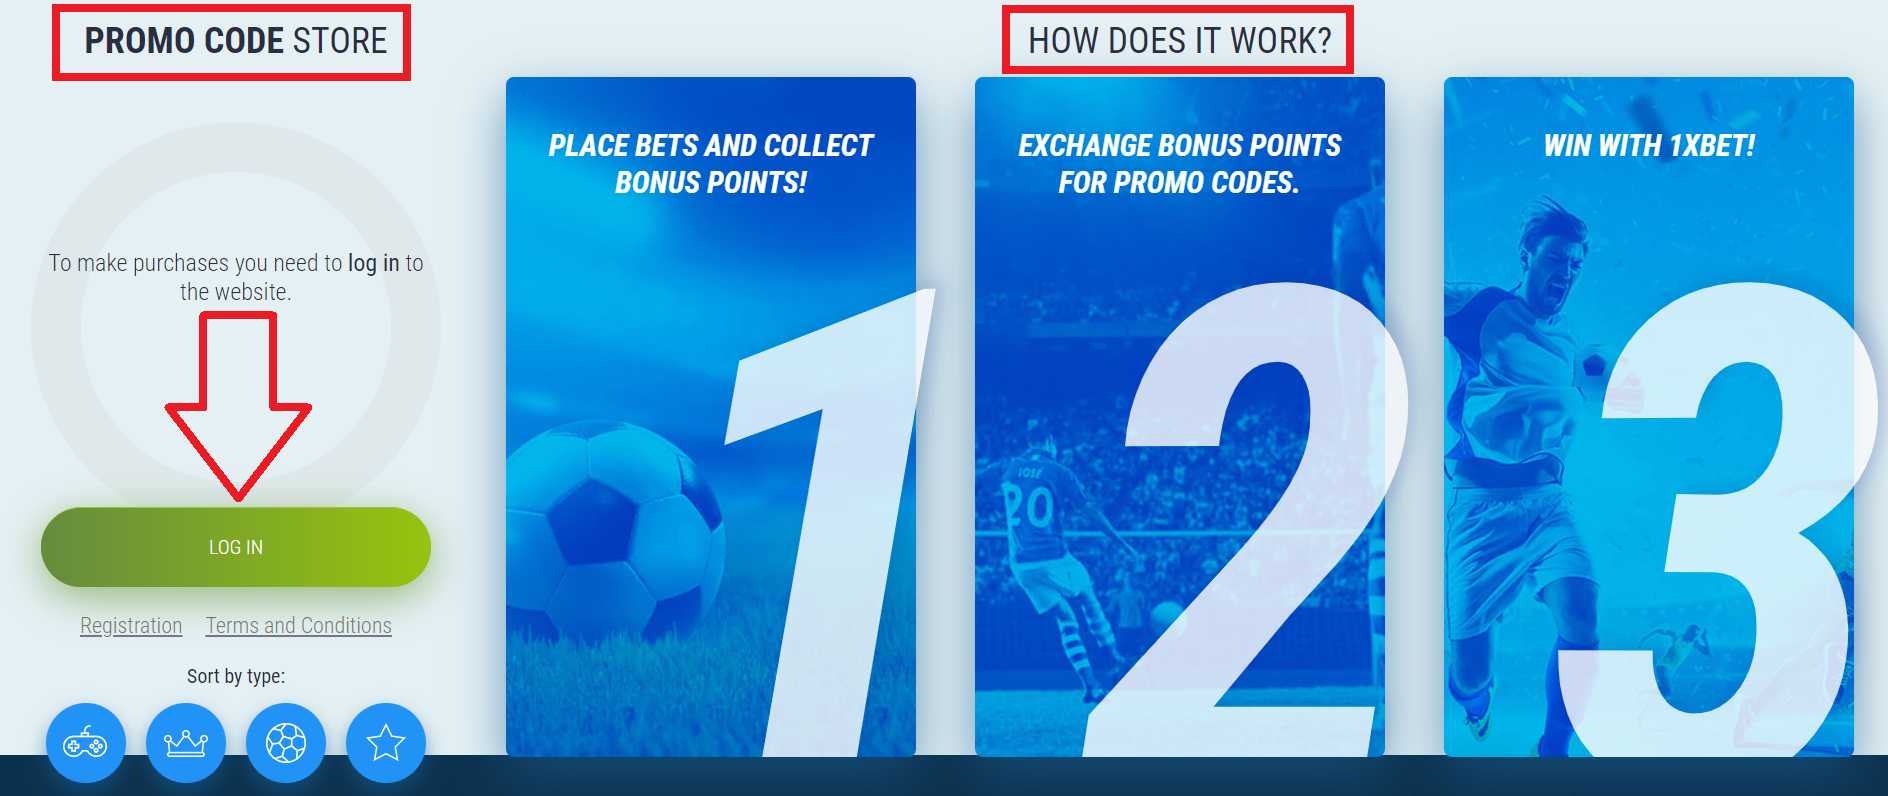 1xBet - how to get a promo code for free spins?